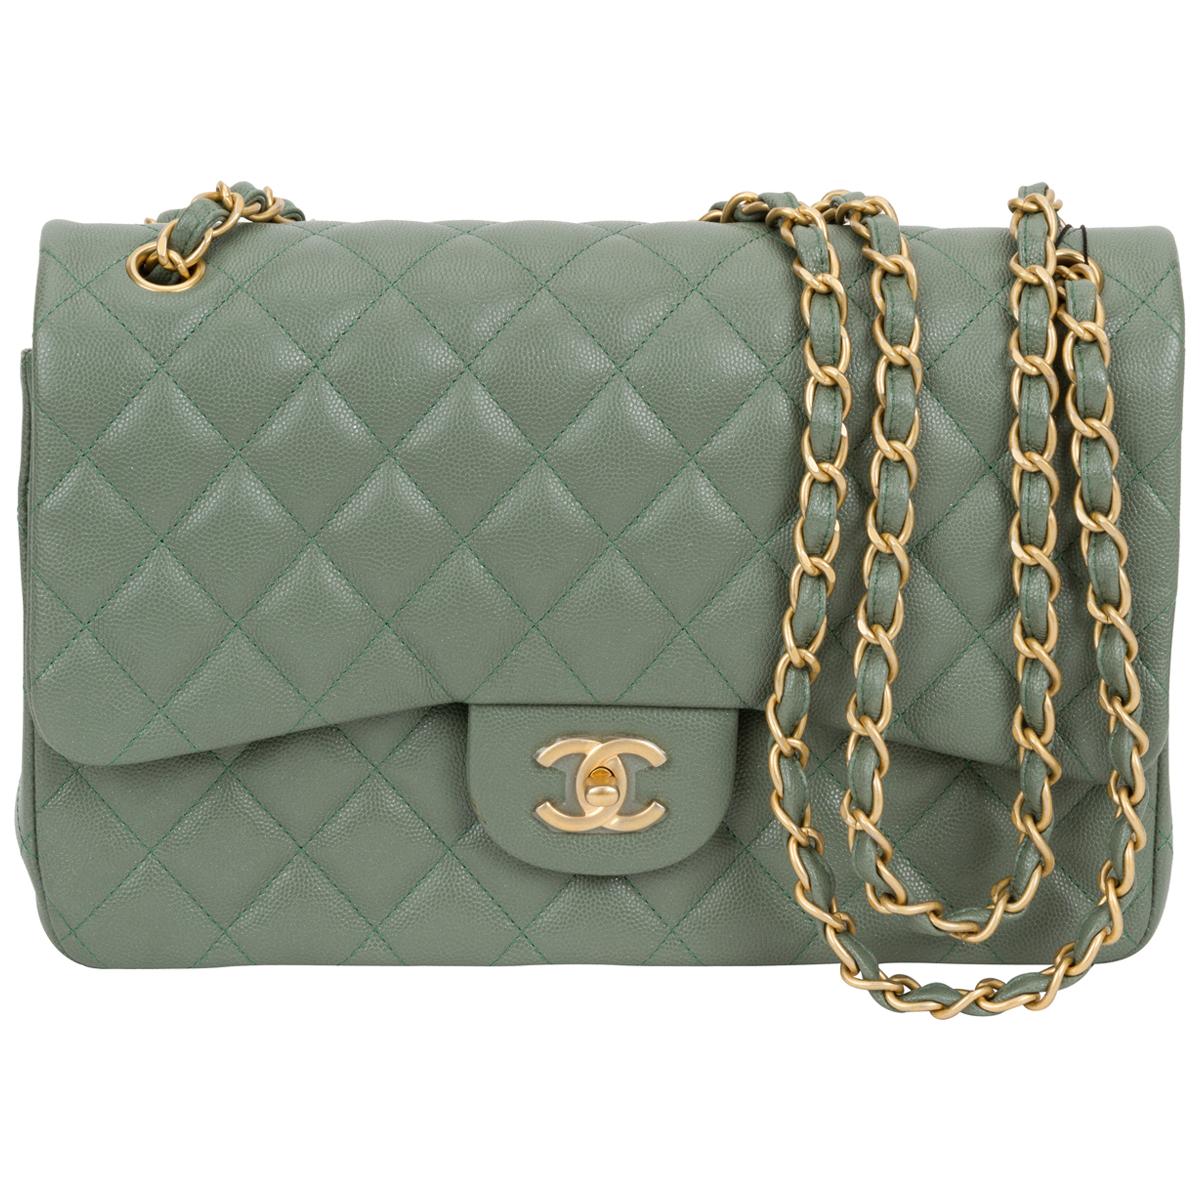 The Always Timeless Chanel Classic Flap Bag, Handbags and Accessories